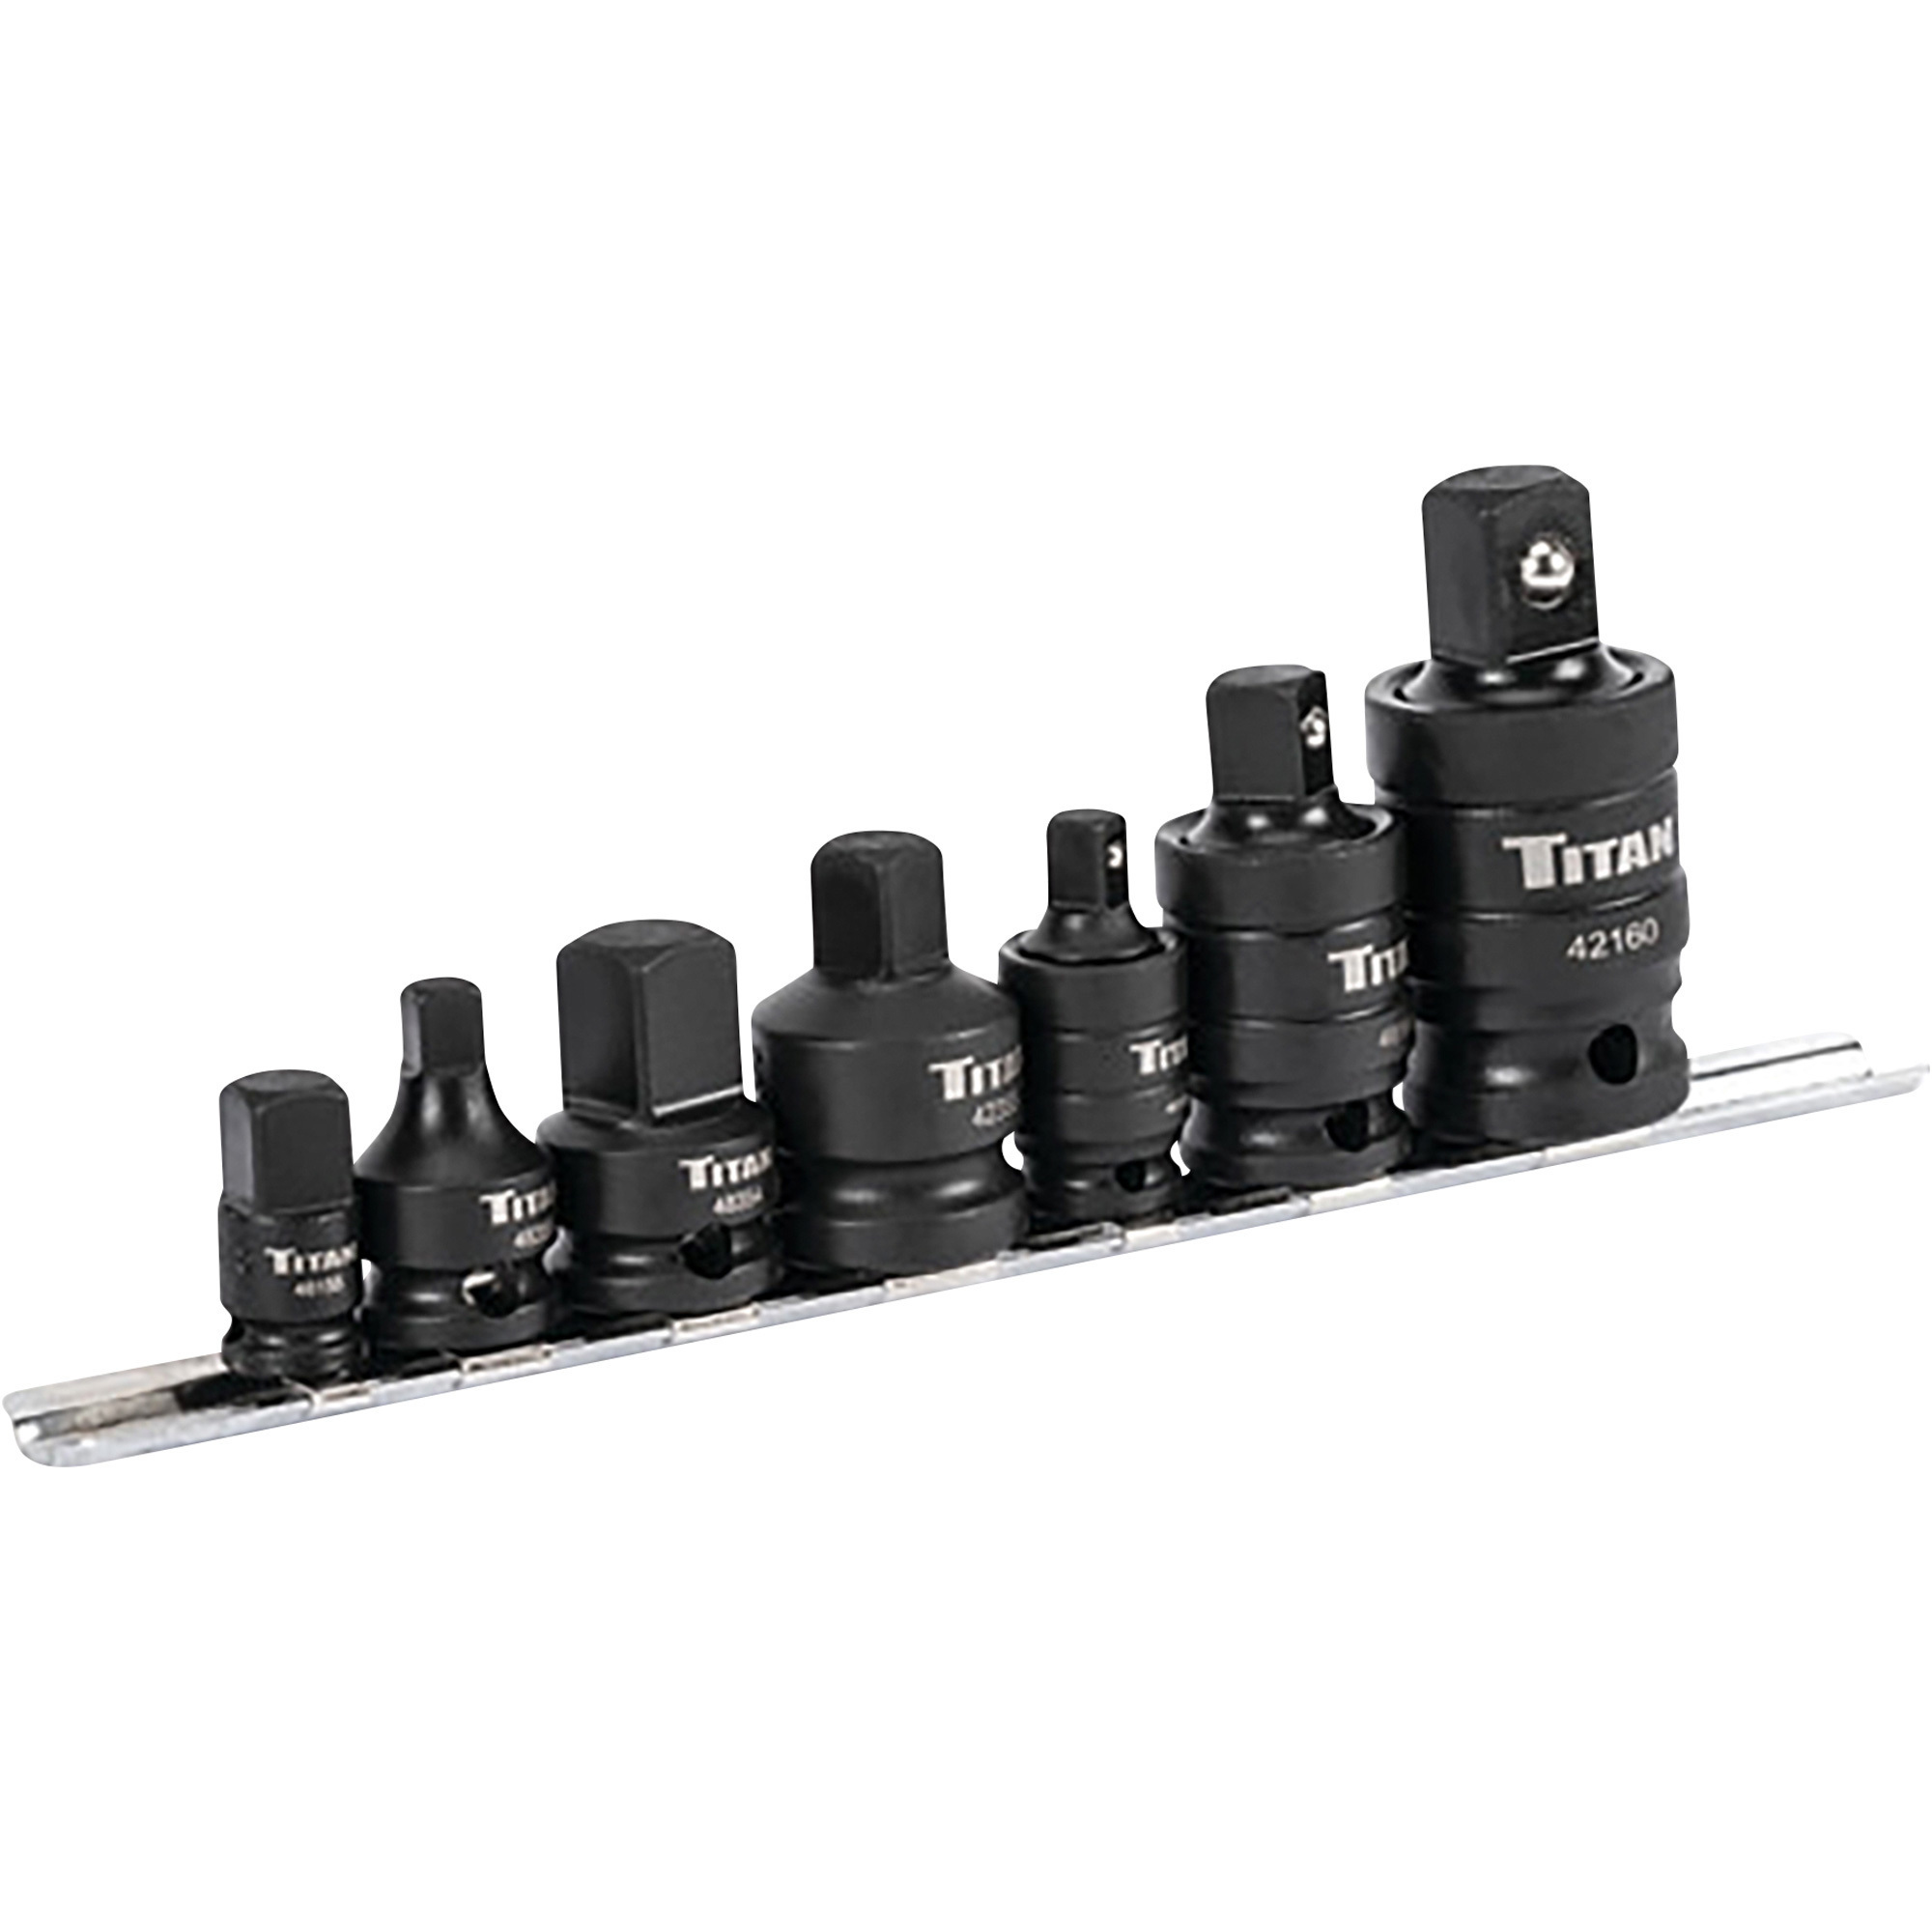 Klutch 7-Piece Impact Adapter and U-Joint Set, Chrome-Moly